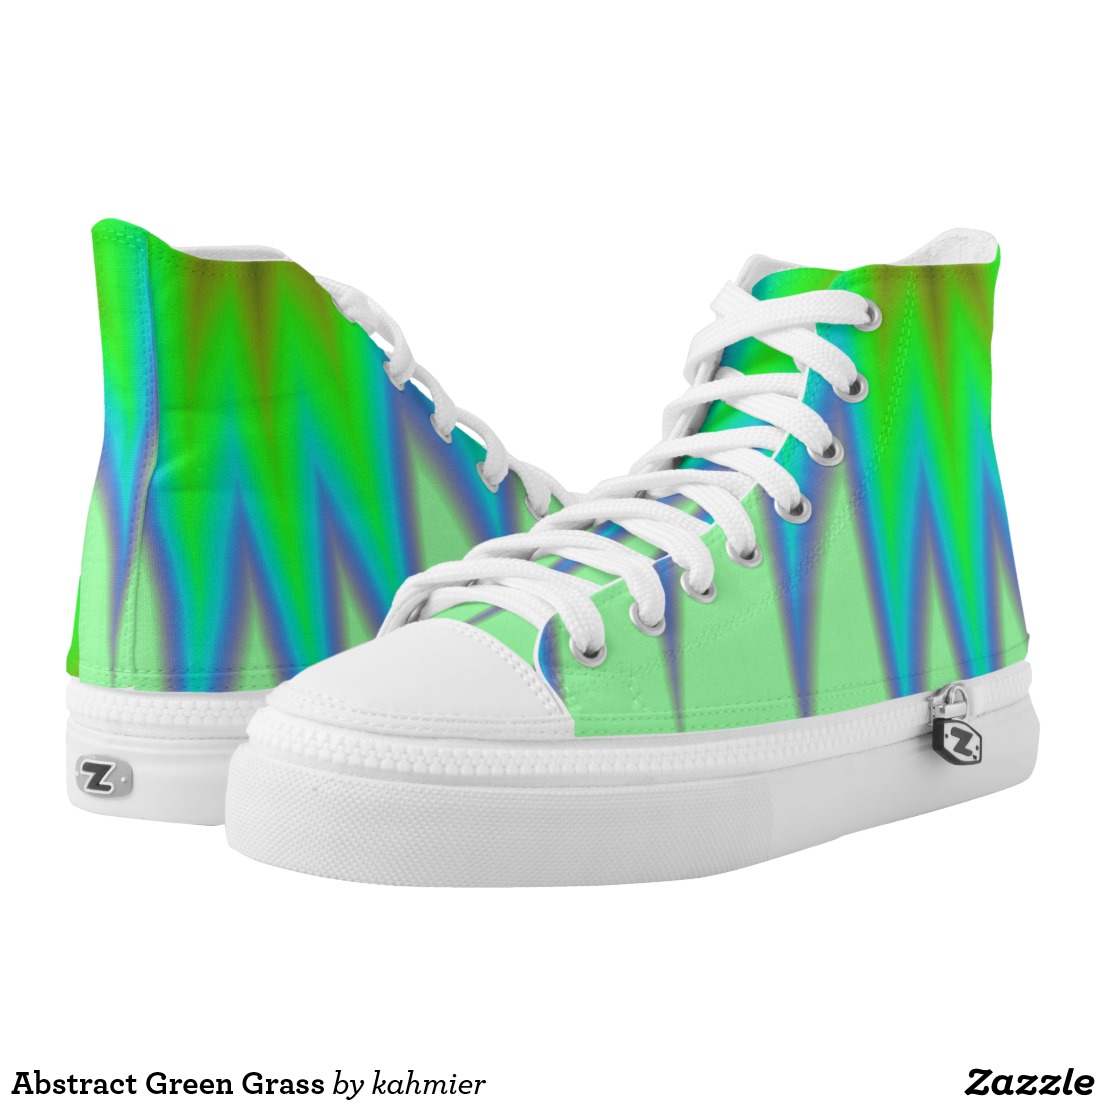 Abstract Green Grass High-Top Sneakers